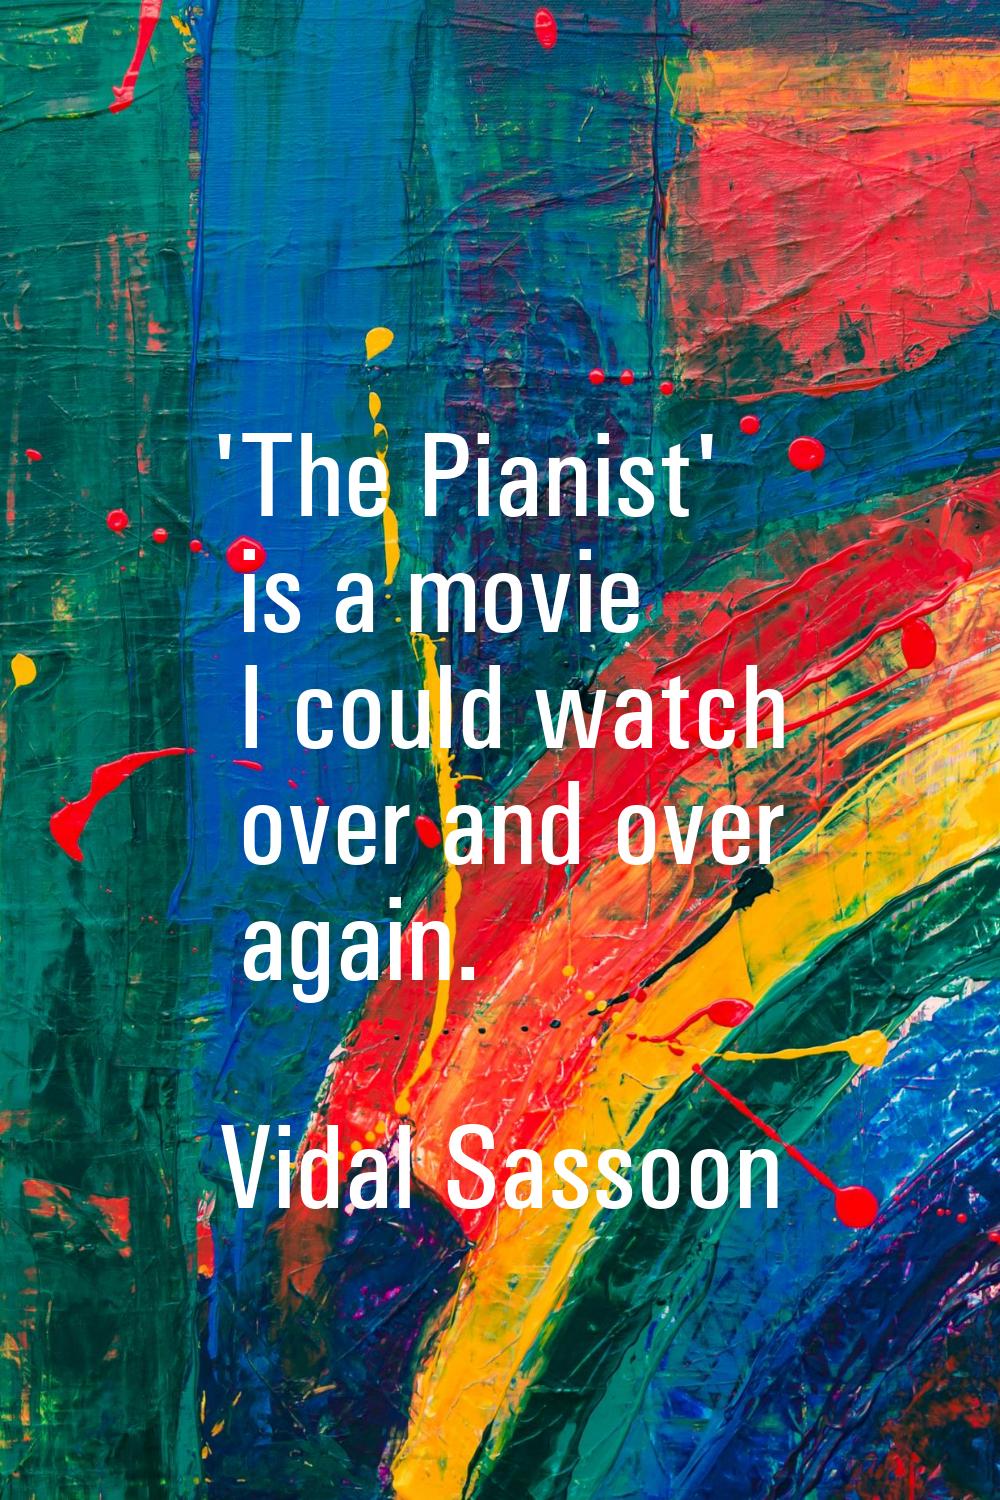 'The Pianist' is a movie I could watch over and over again.